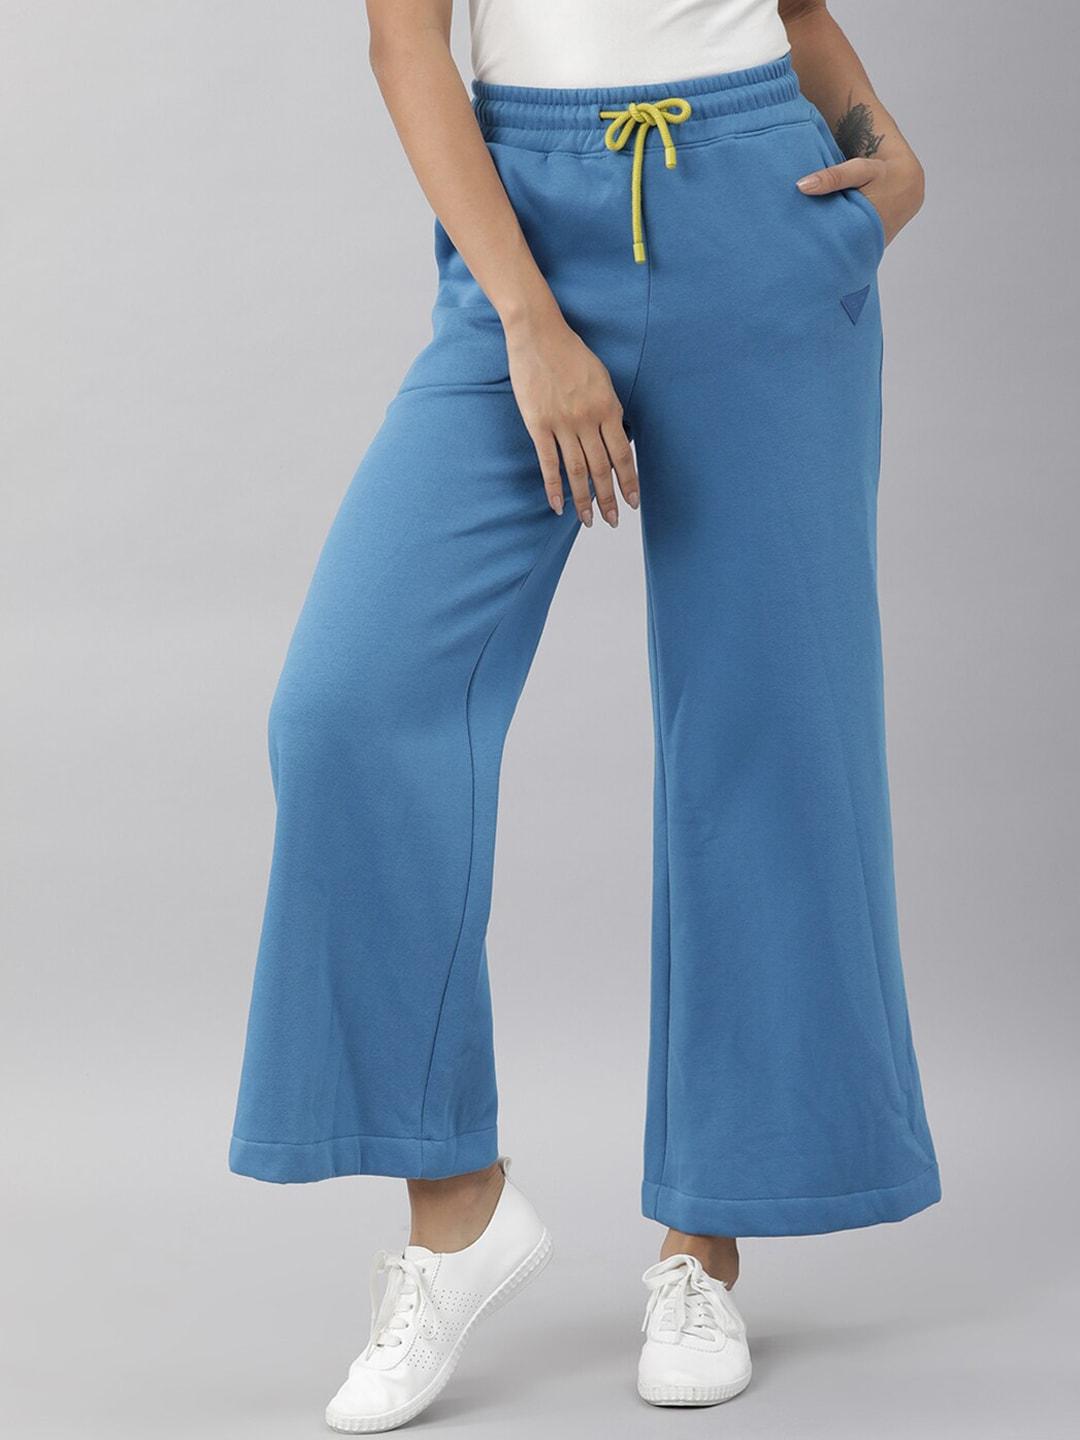 rareism-women-blue-solid-relaxed-fit-track-pants